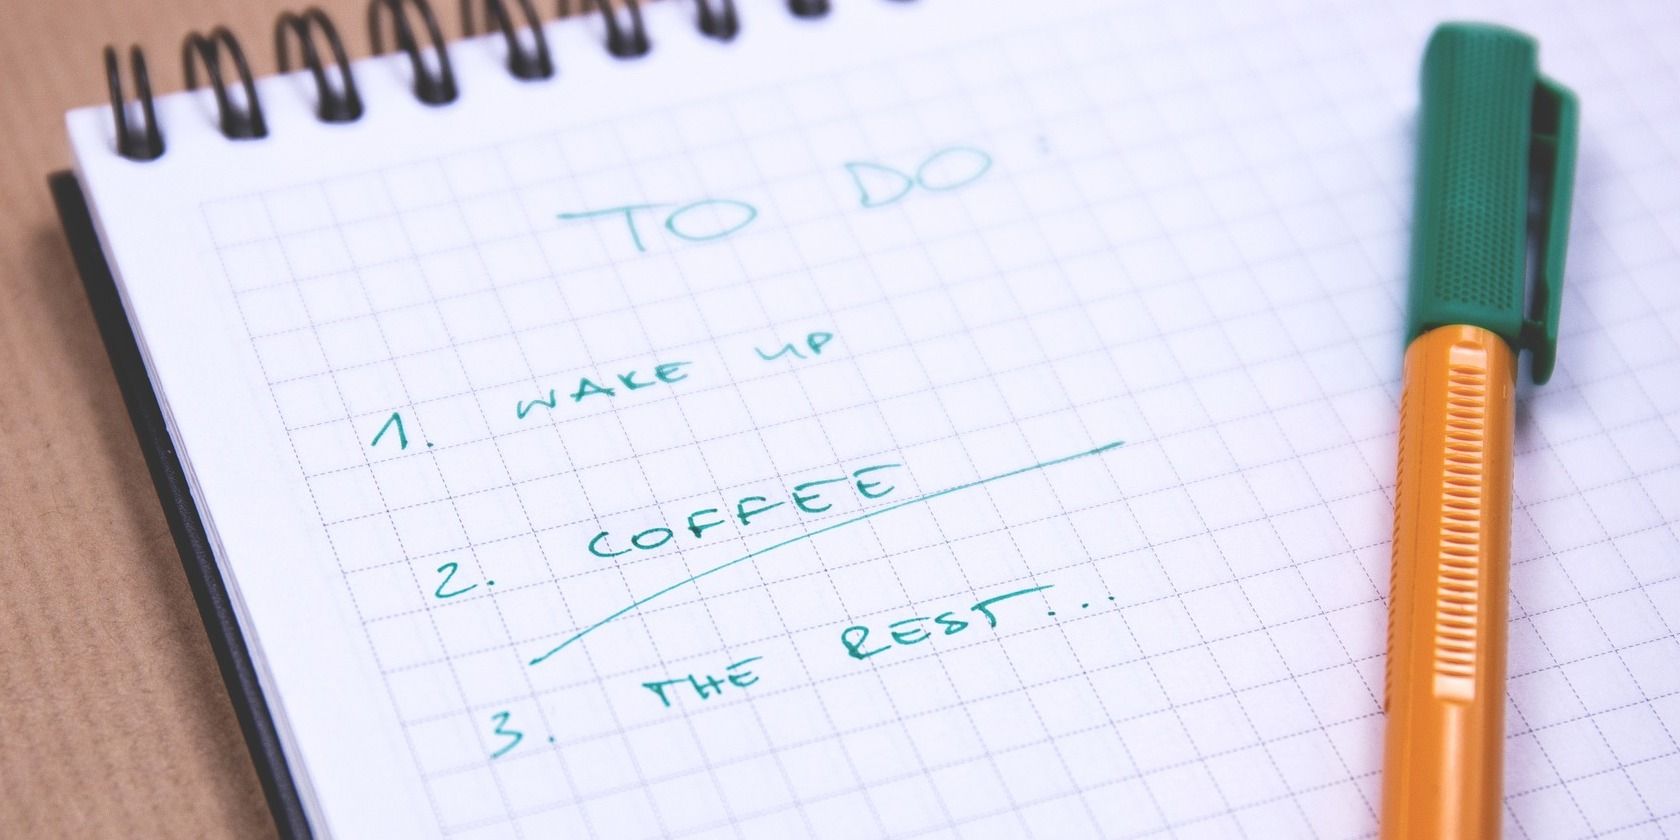 Image showing a notepad with a to-do list and a pen